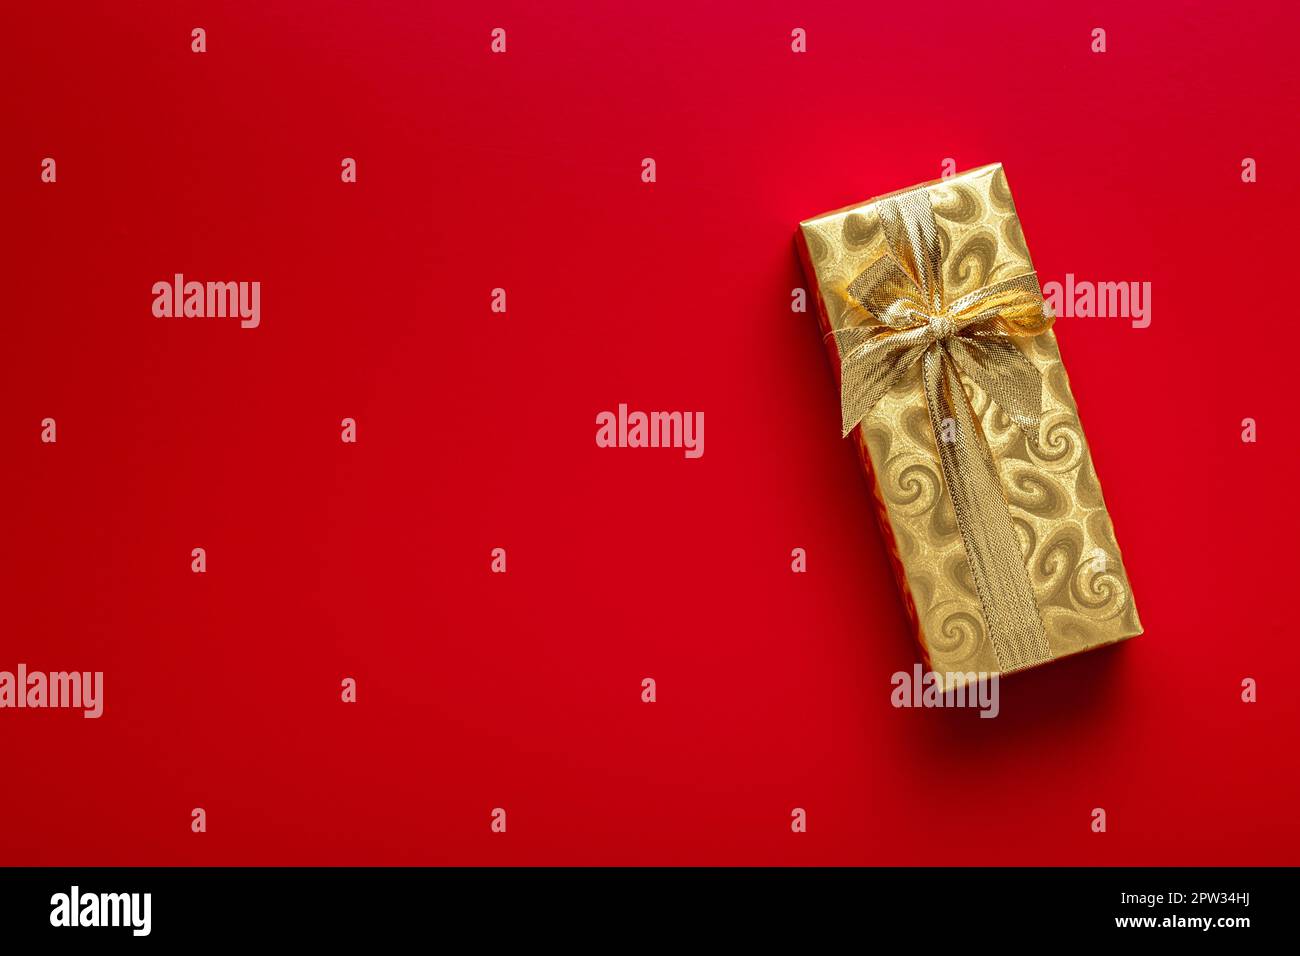 Gift wrapped in gold foil. Christmas present with gold ribbon on the red background. Top view. Stock Photo